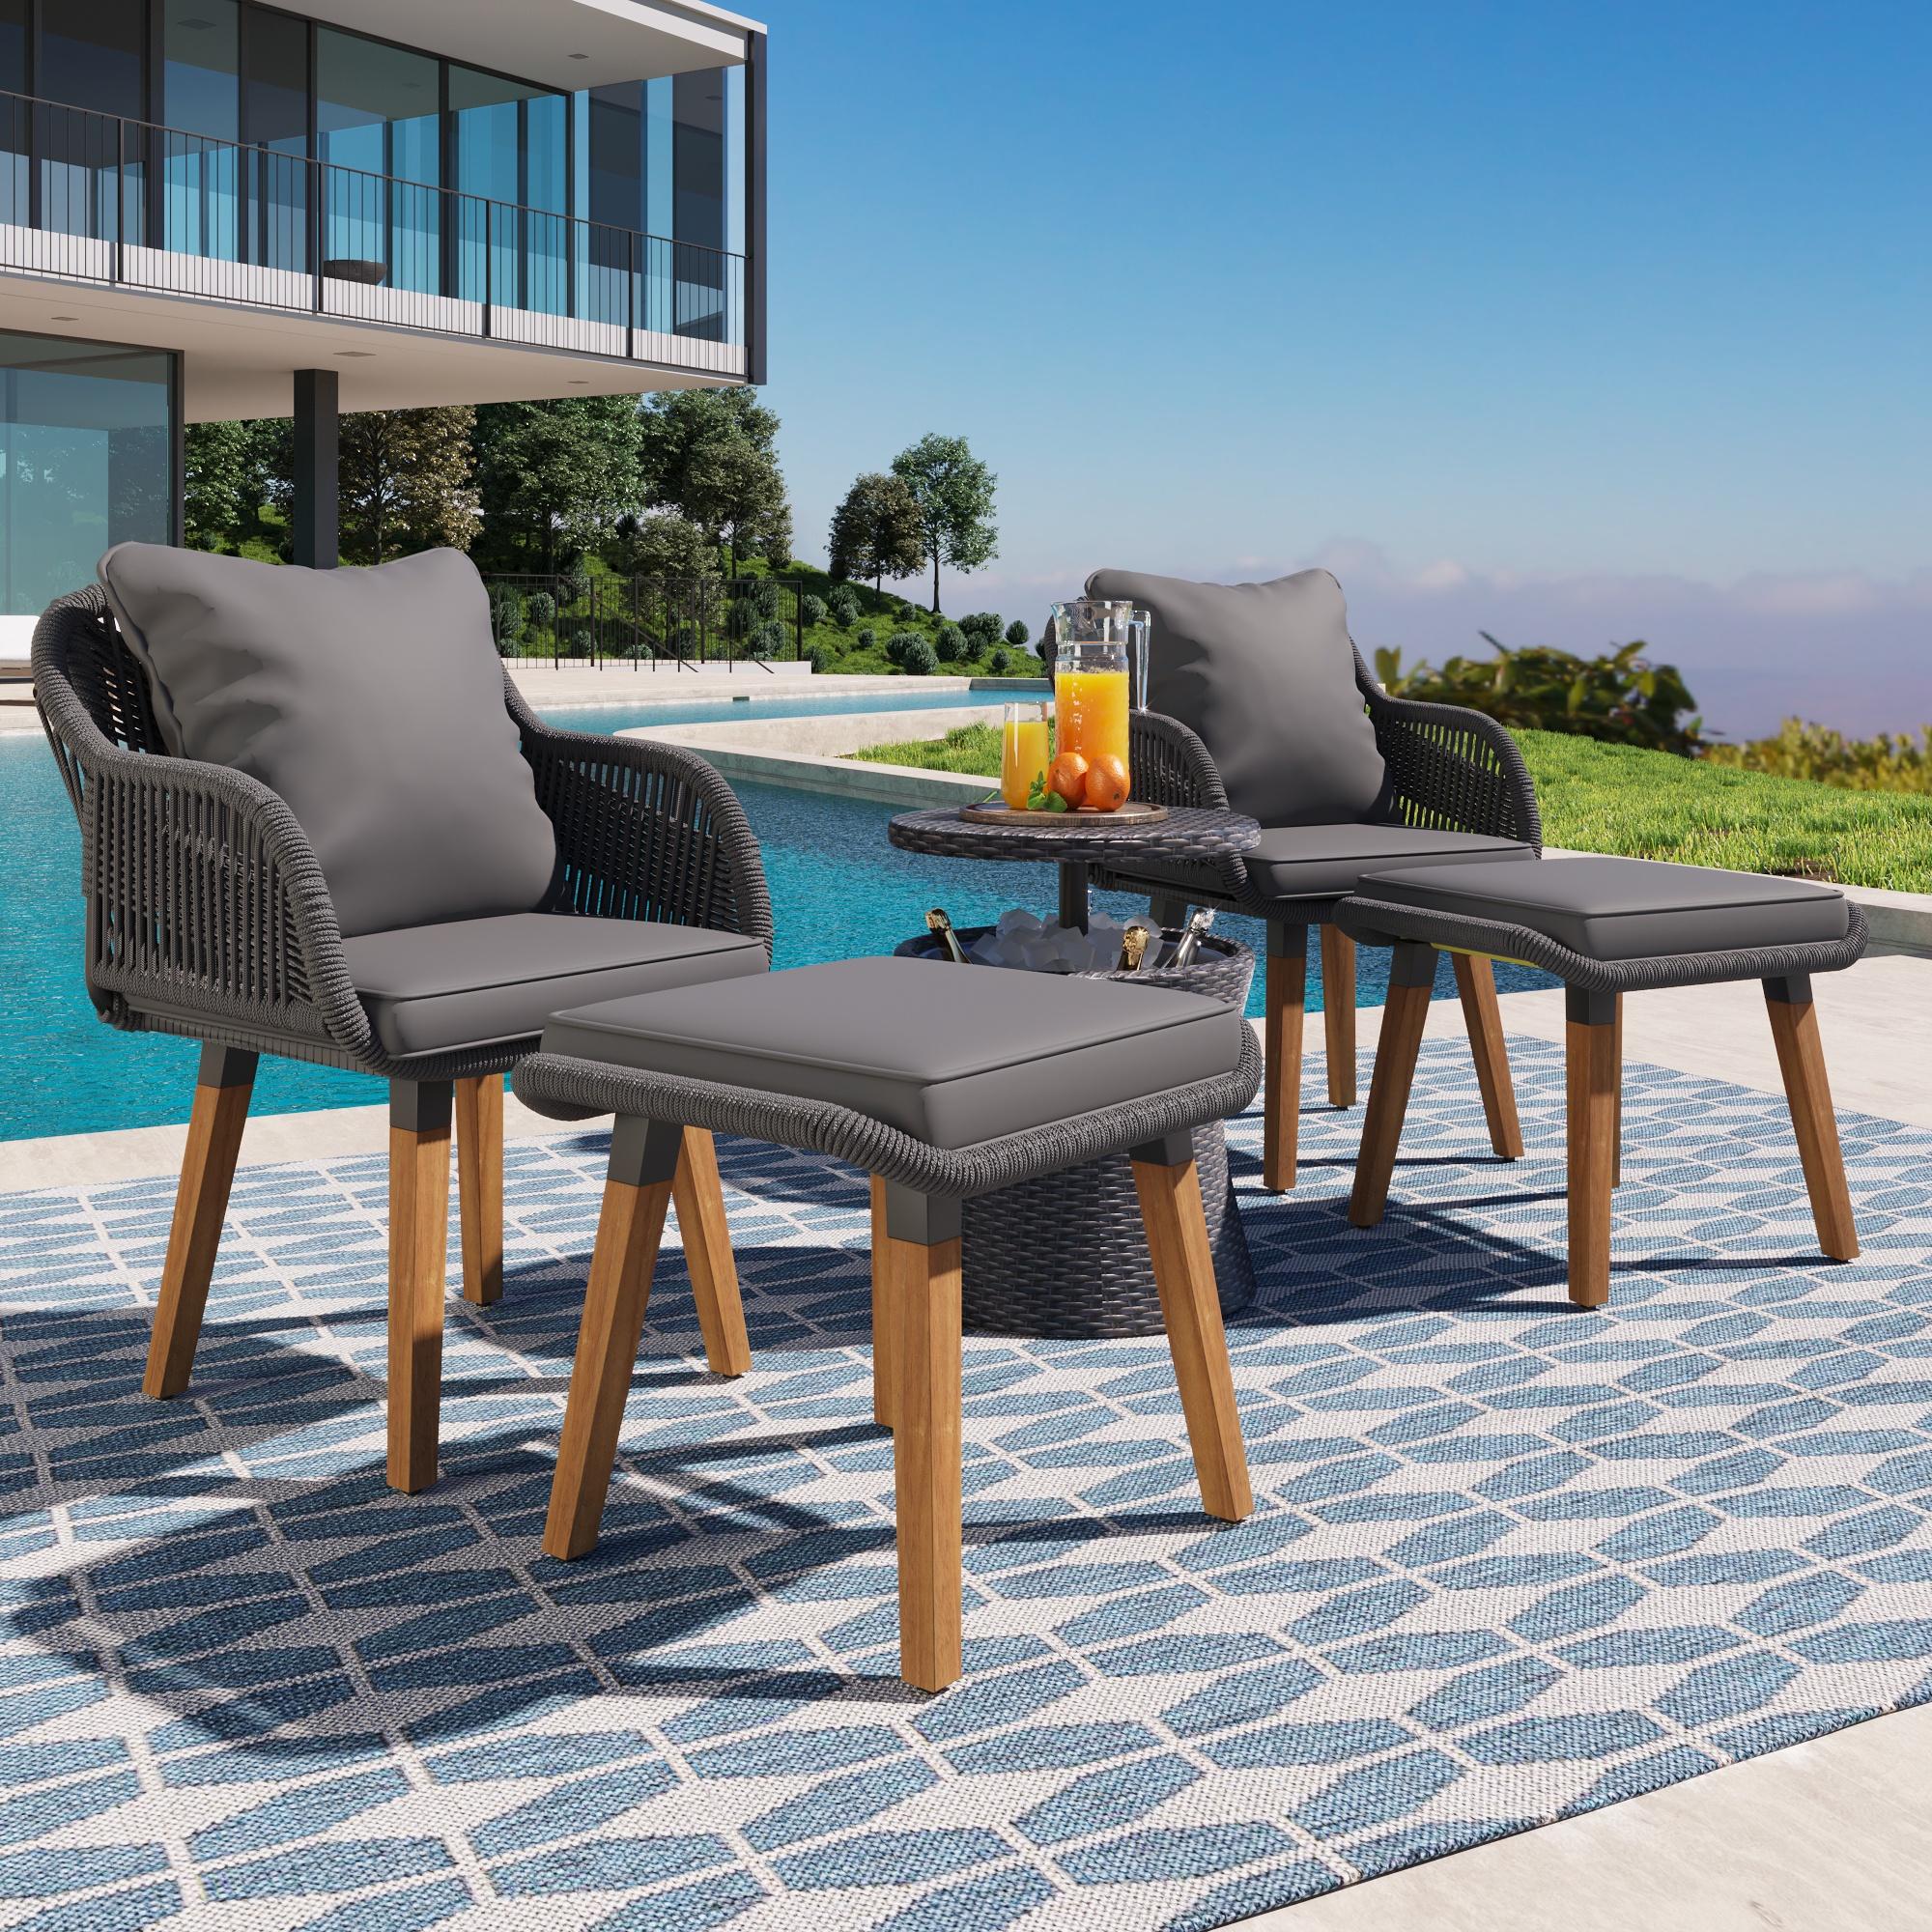 SYNGAR Patio Wicker Chairs Set, 5 PCS Patio Furniture Set with Coffee Table, Ottoman Footrest and Gray Cushions, Outside Sectional Sofa Set, Porch Balcony Lawn Pool Conversation Set, GE037 - image 3 of 11